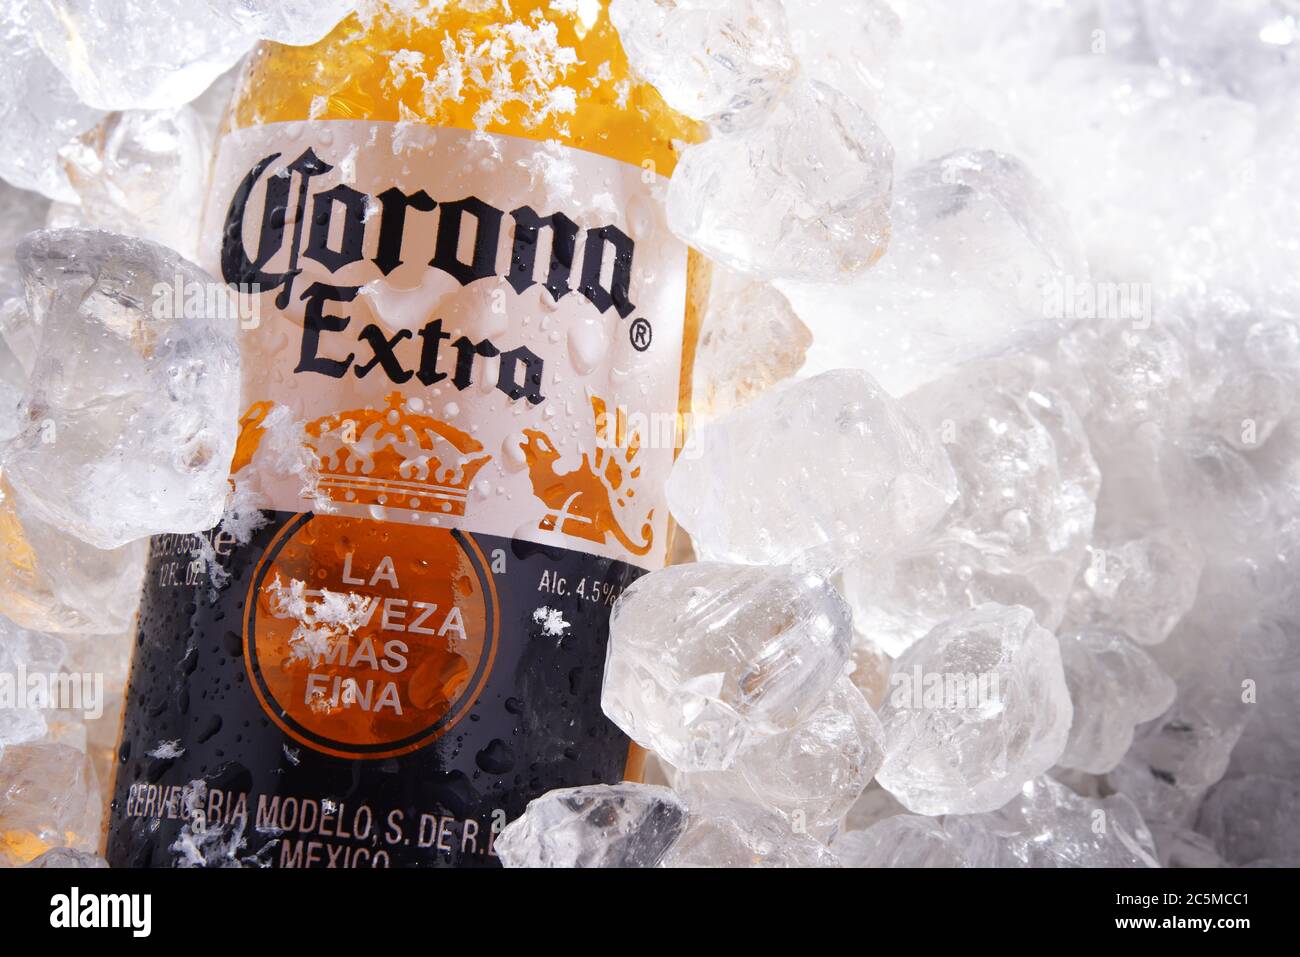 POZNAN, POL - MAY 22, 2020: Bottle of Corona Extra, one of the top-selling beers worldwide, a pale lager produced by Cerveceria Modelo in Mexico Stock Photo